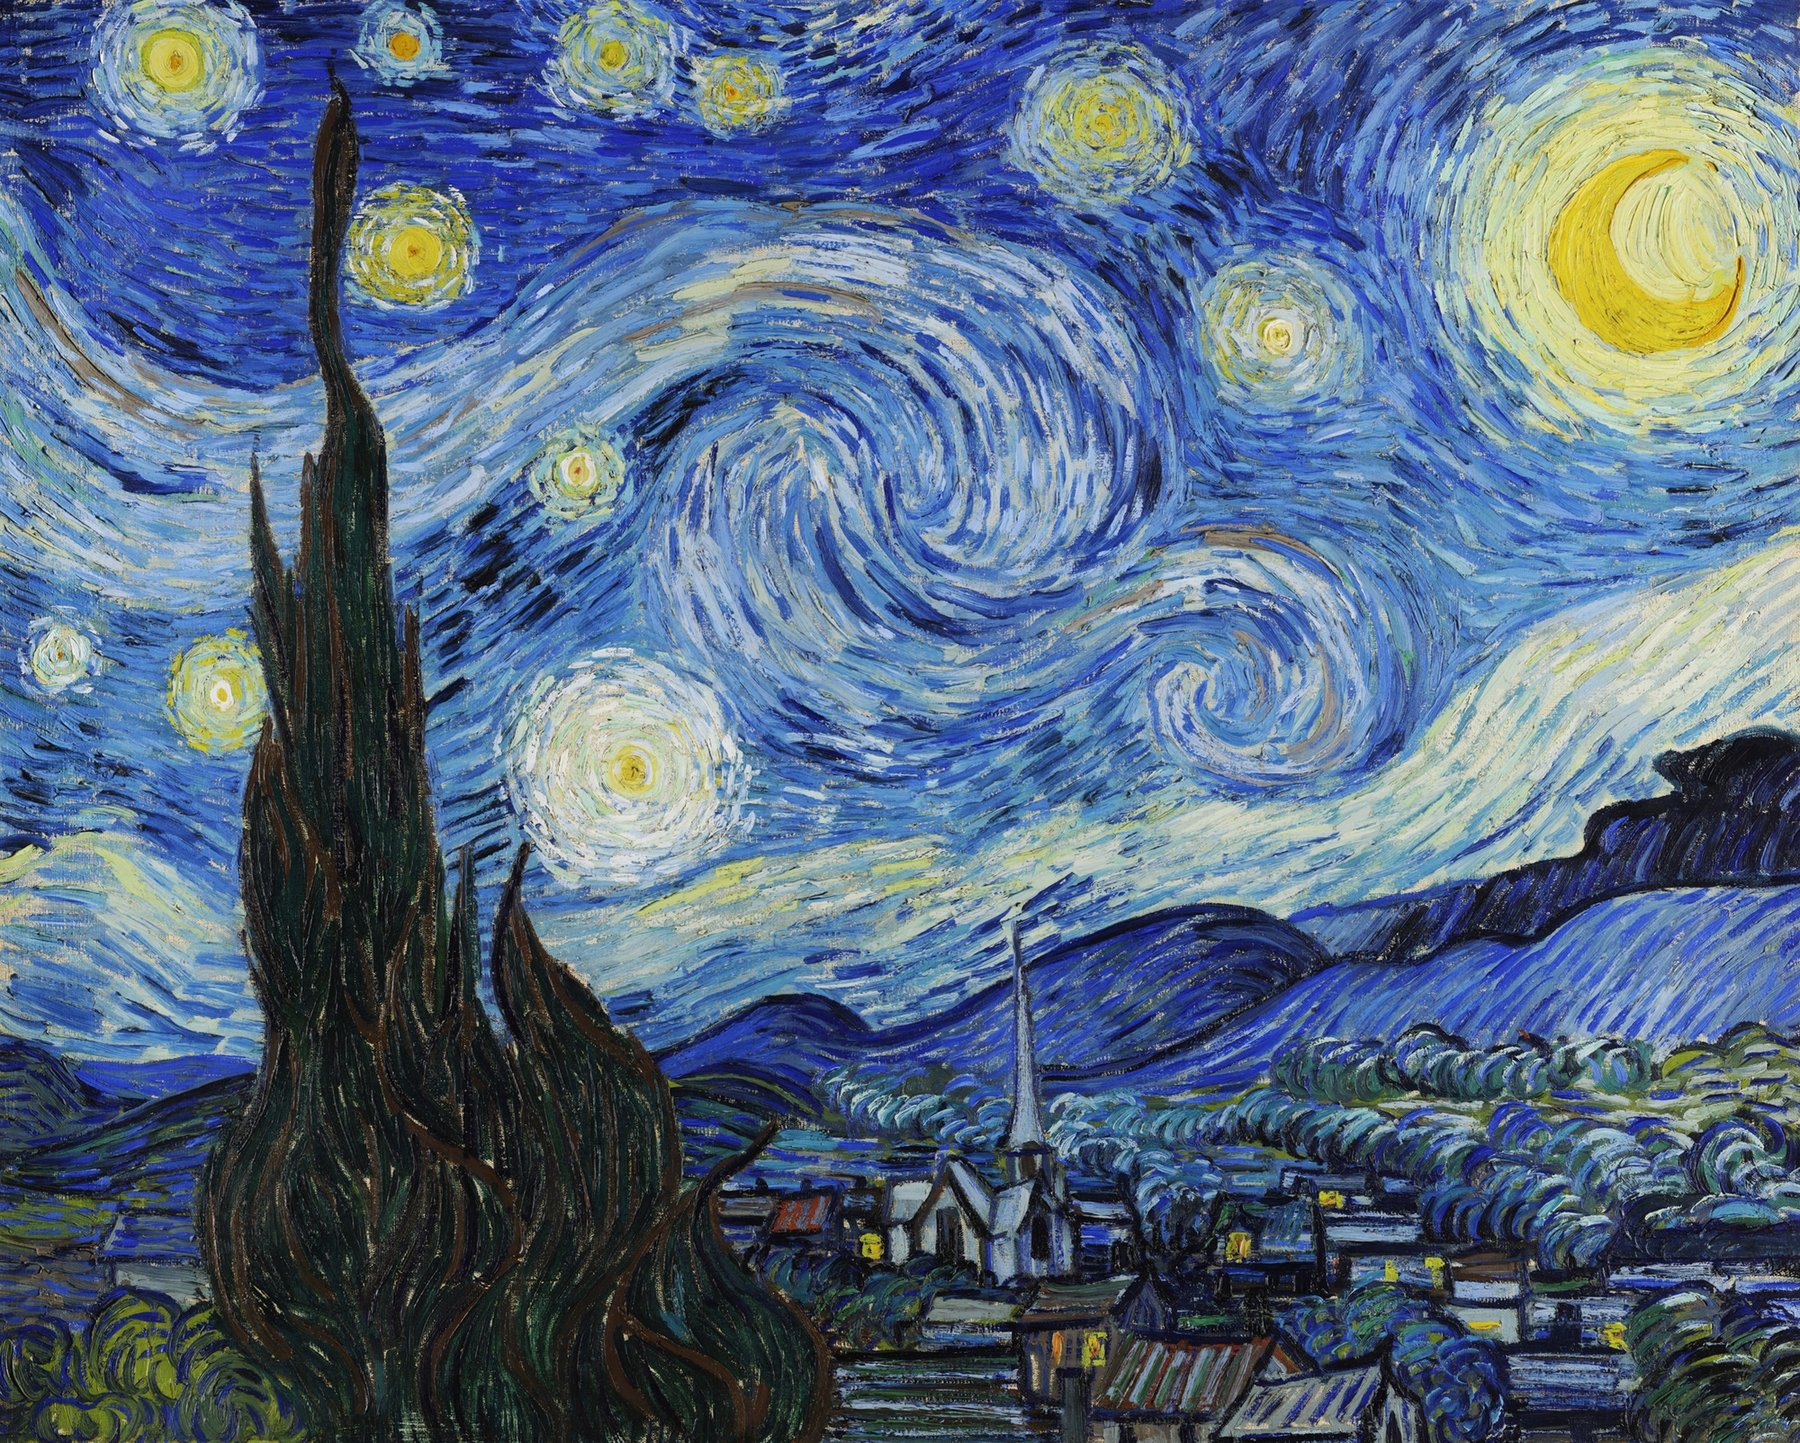 The starry night wallpaper - Happywall